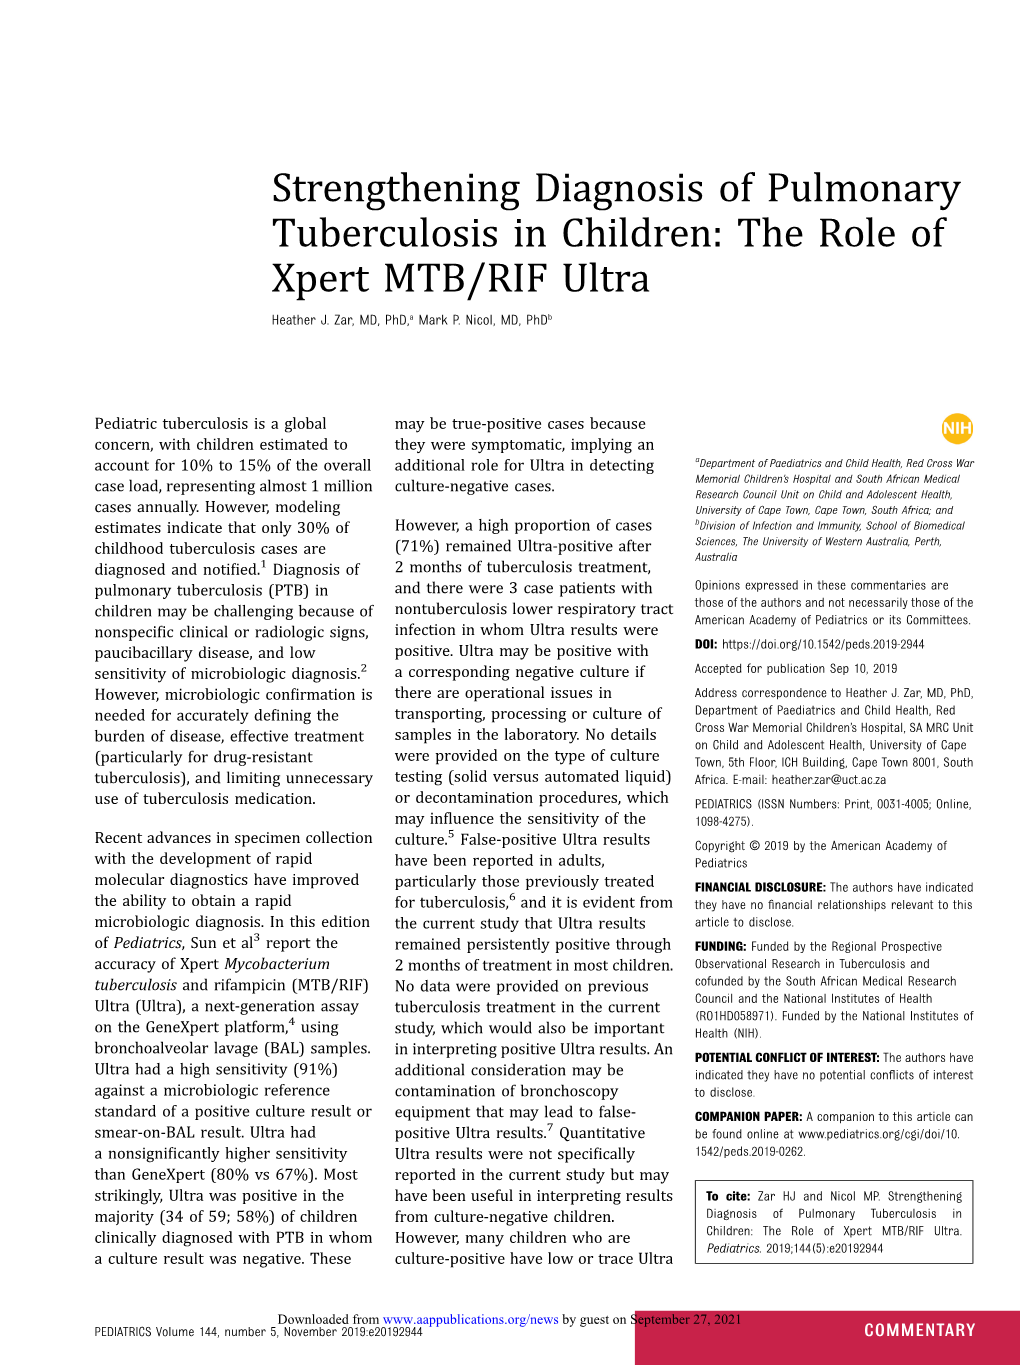 Strengthening Diagnosis of Pulmonary Tuberculosis in Children: the Role of Xpert MTB/RIF Ultra Heather J